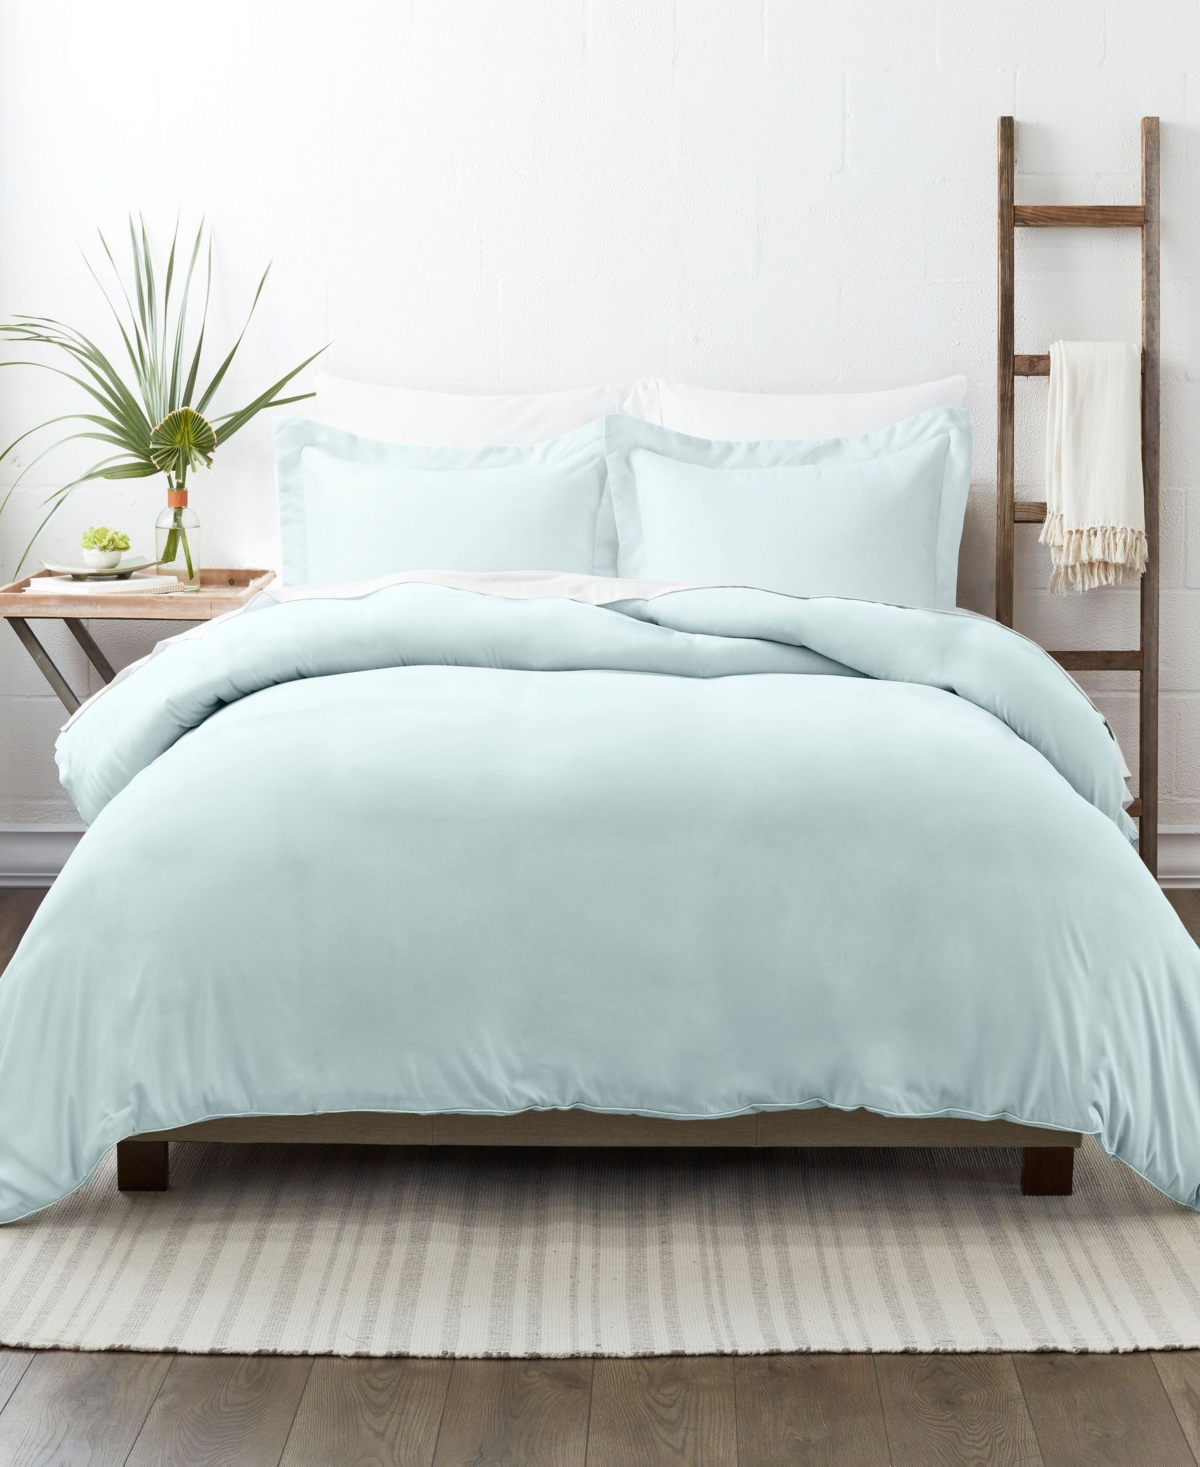 Ienjoy Home Dynamically Dashing Duvet Cover Set By The Home Collection, Twin/twin Xl In Mint